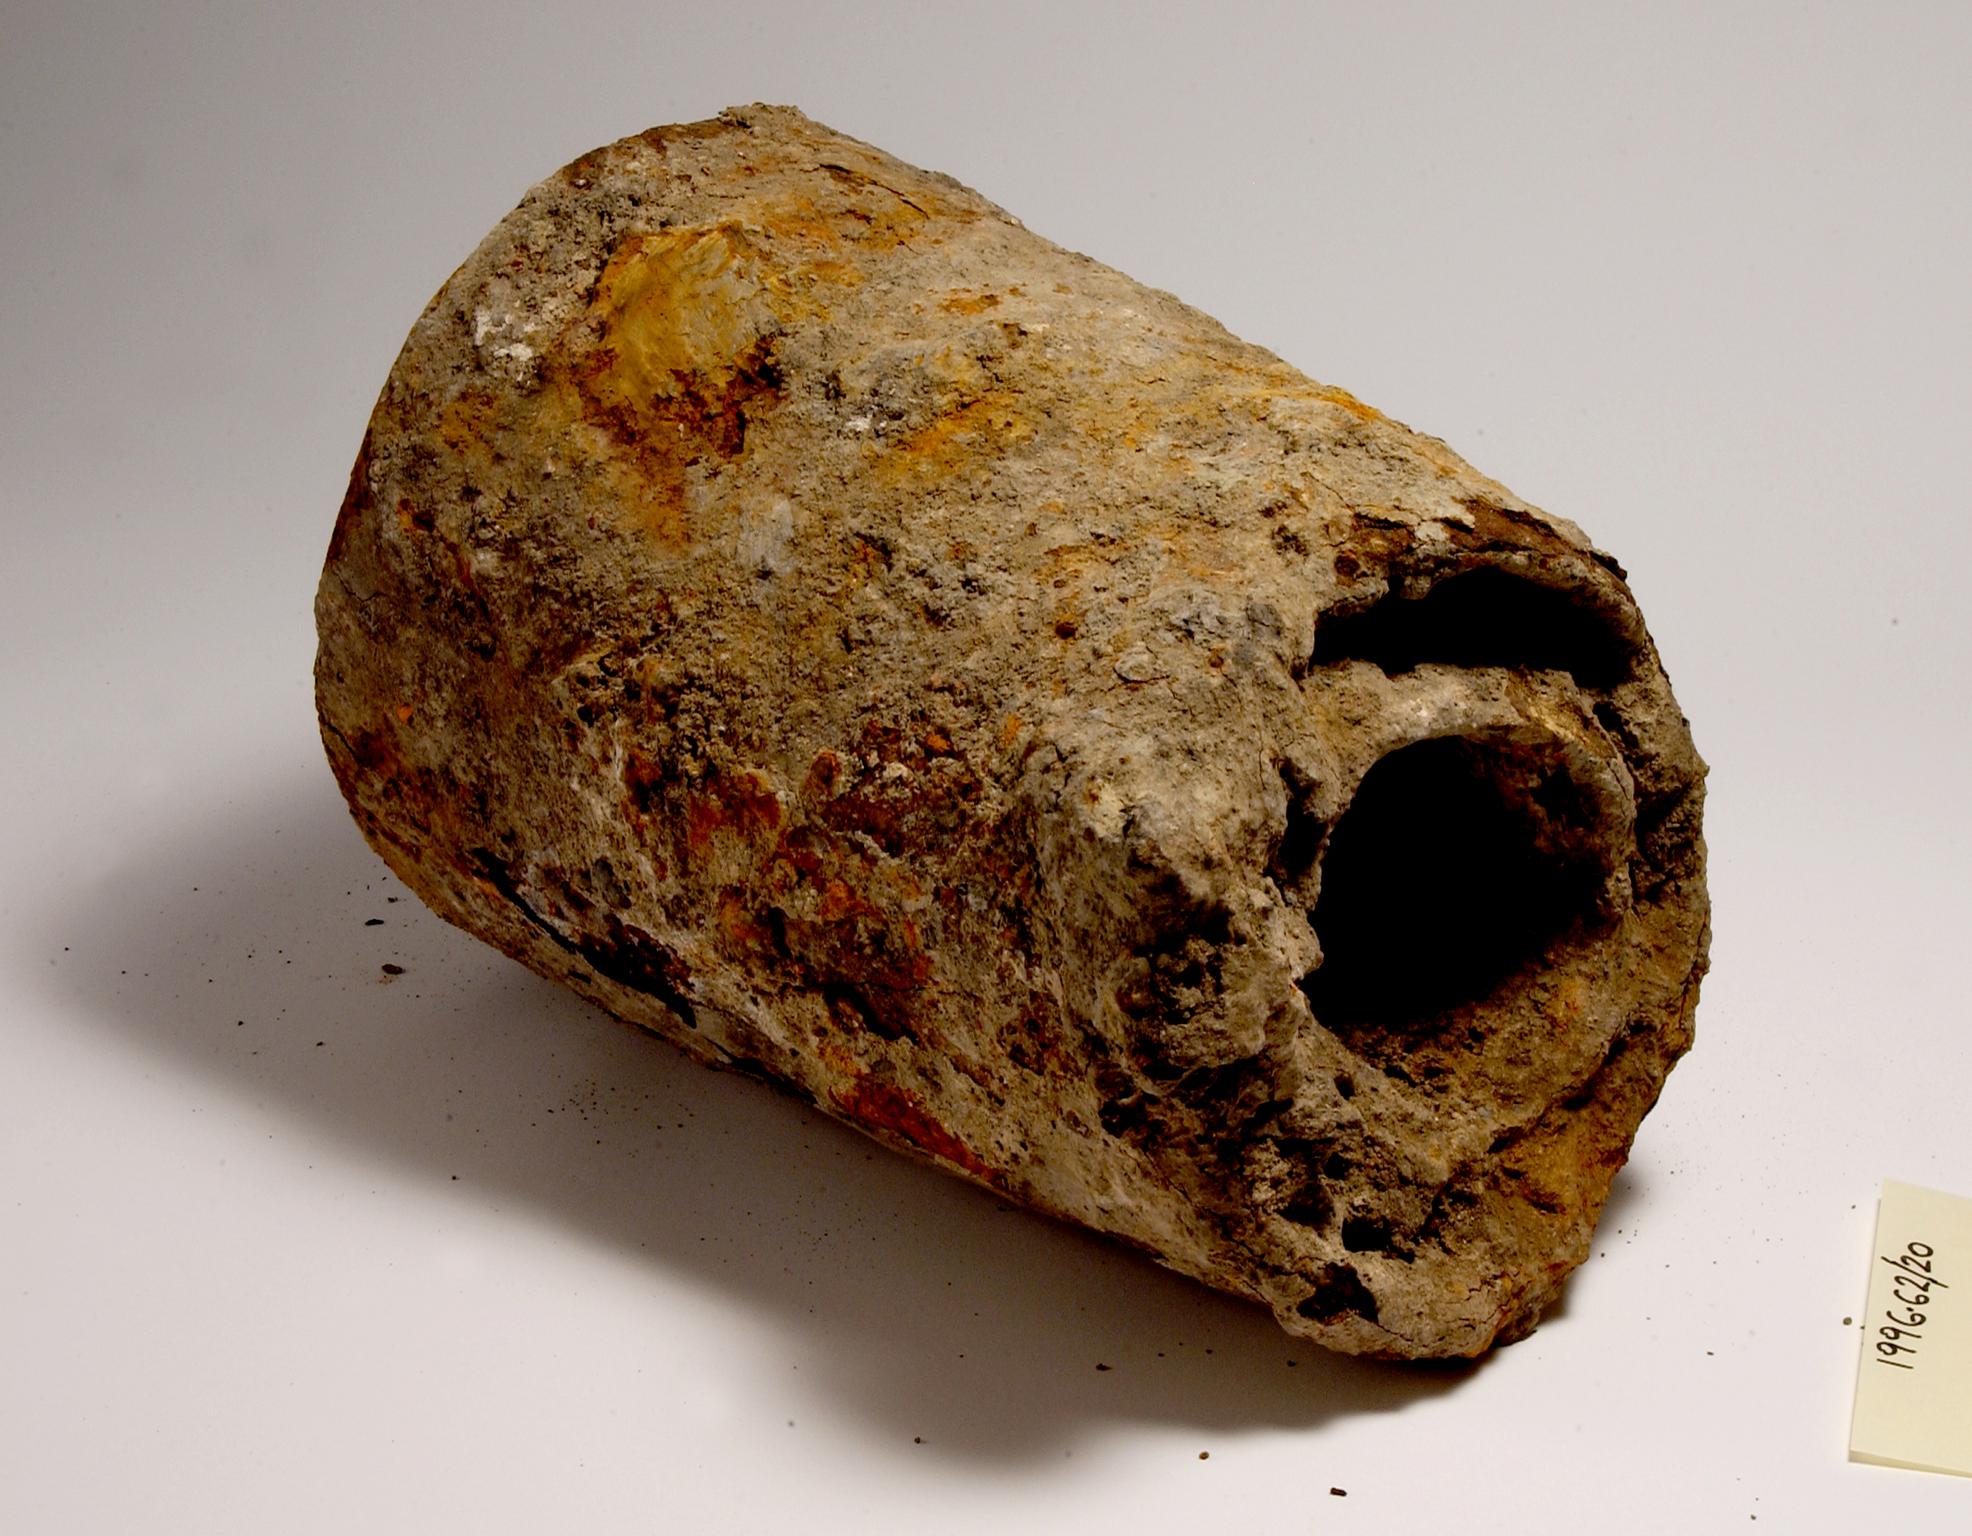 Object excavated from Cefn Cribwr ironworks site